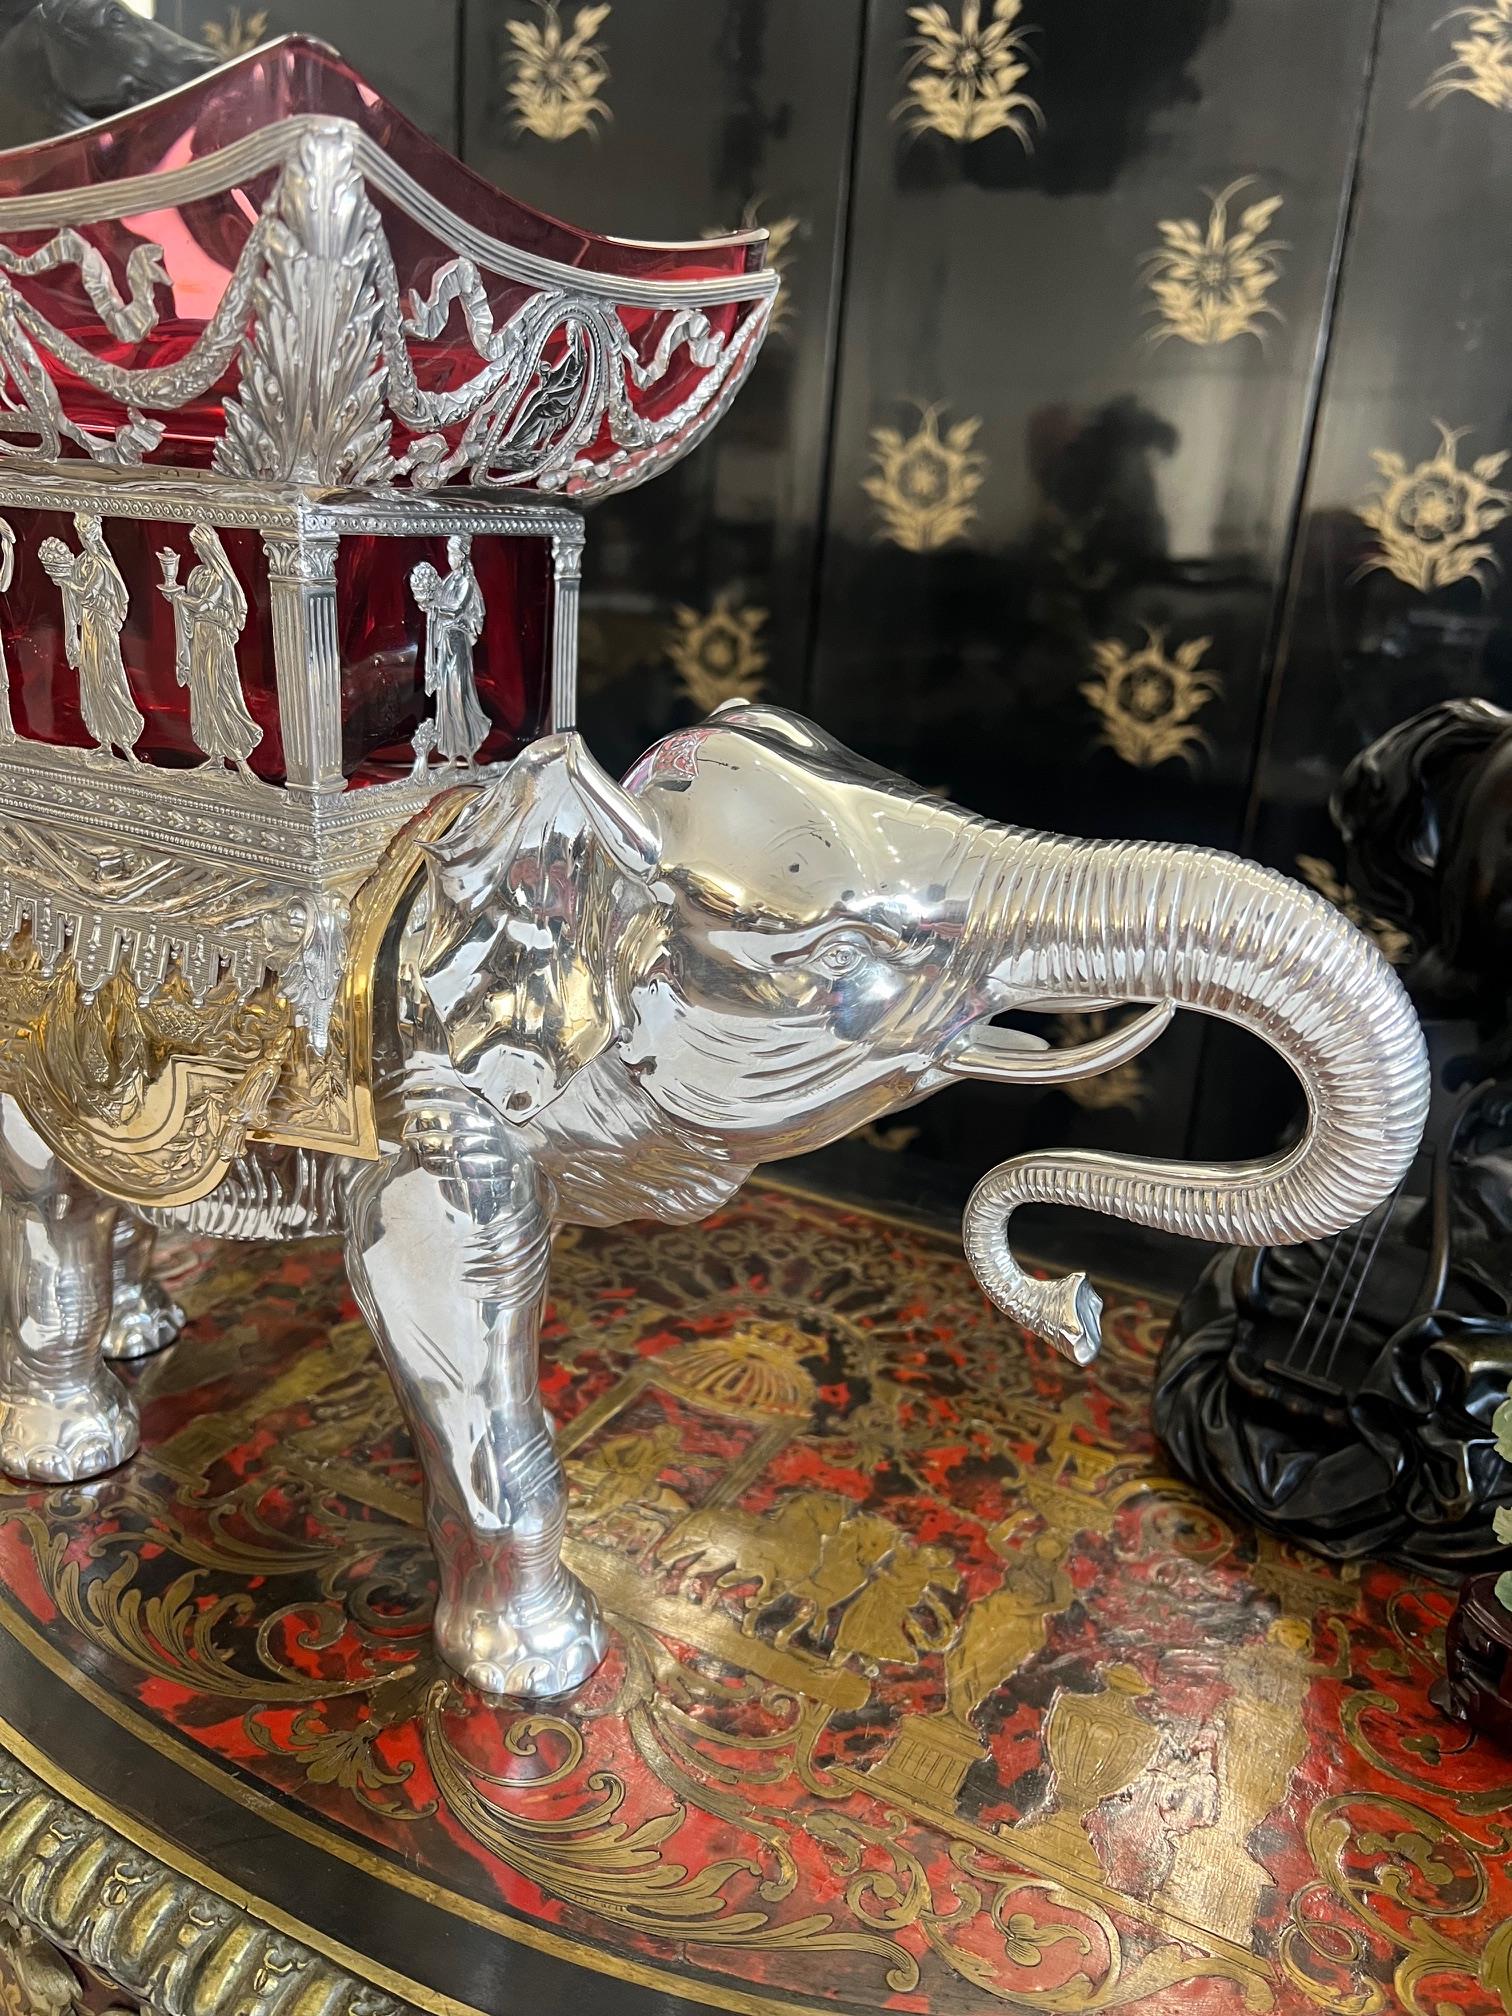 A LARGE SILVER, SILVER GILT AND RUBY GLASS ELEPHANT VASE, GERMAN, 20TH CENTURY - Image 3 of 7